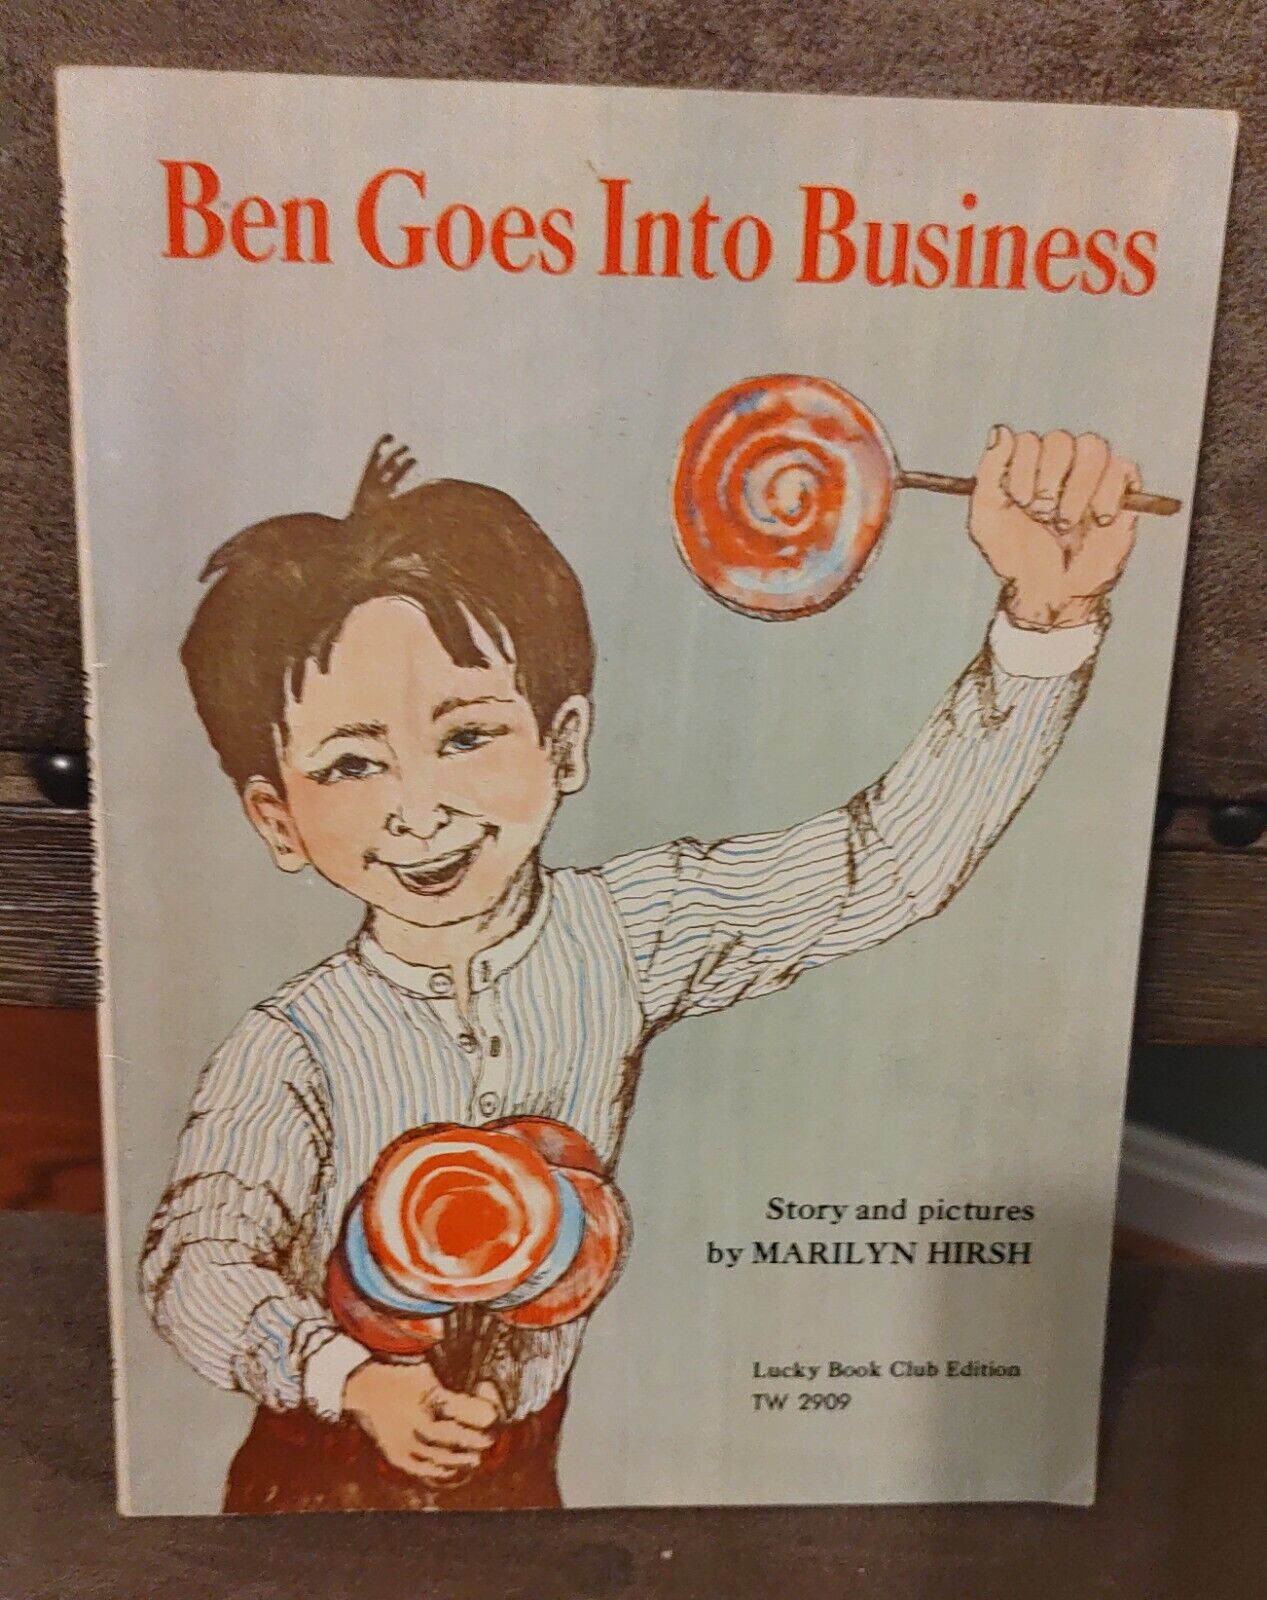 Vintage Ben Goes Into Business Book By Marilyn Hirsh $12